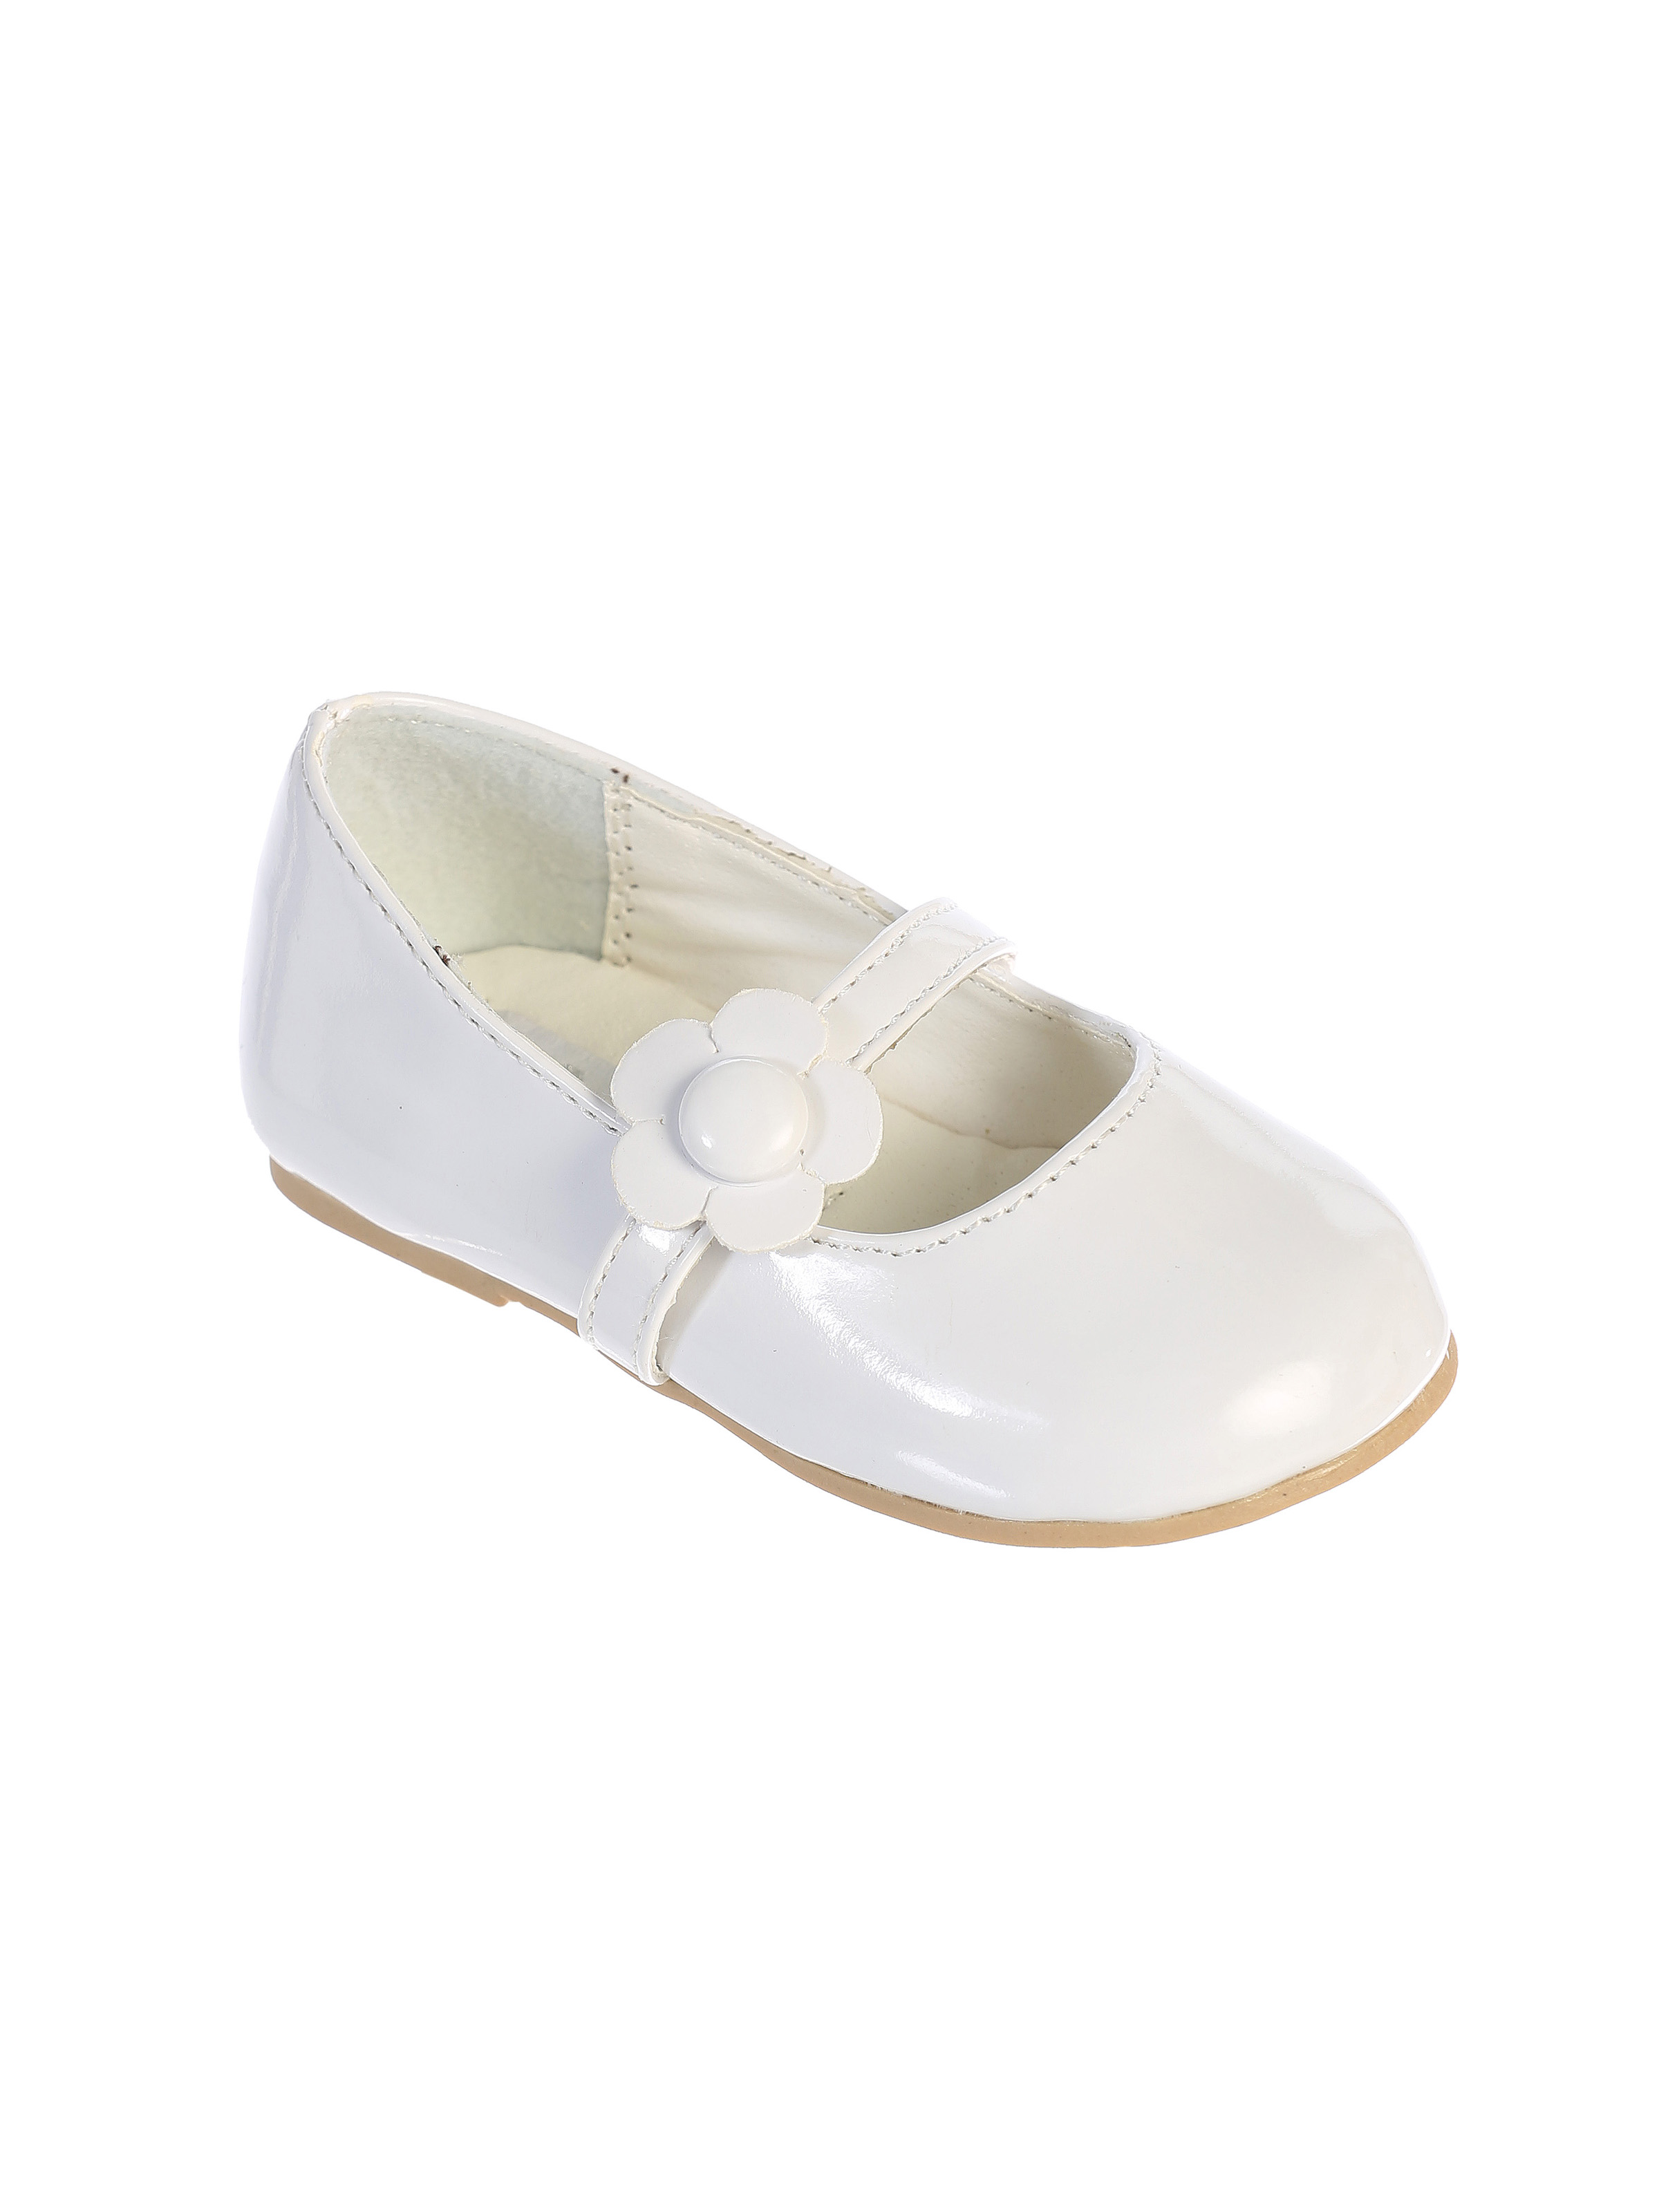 next flower girl shoes